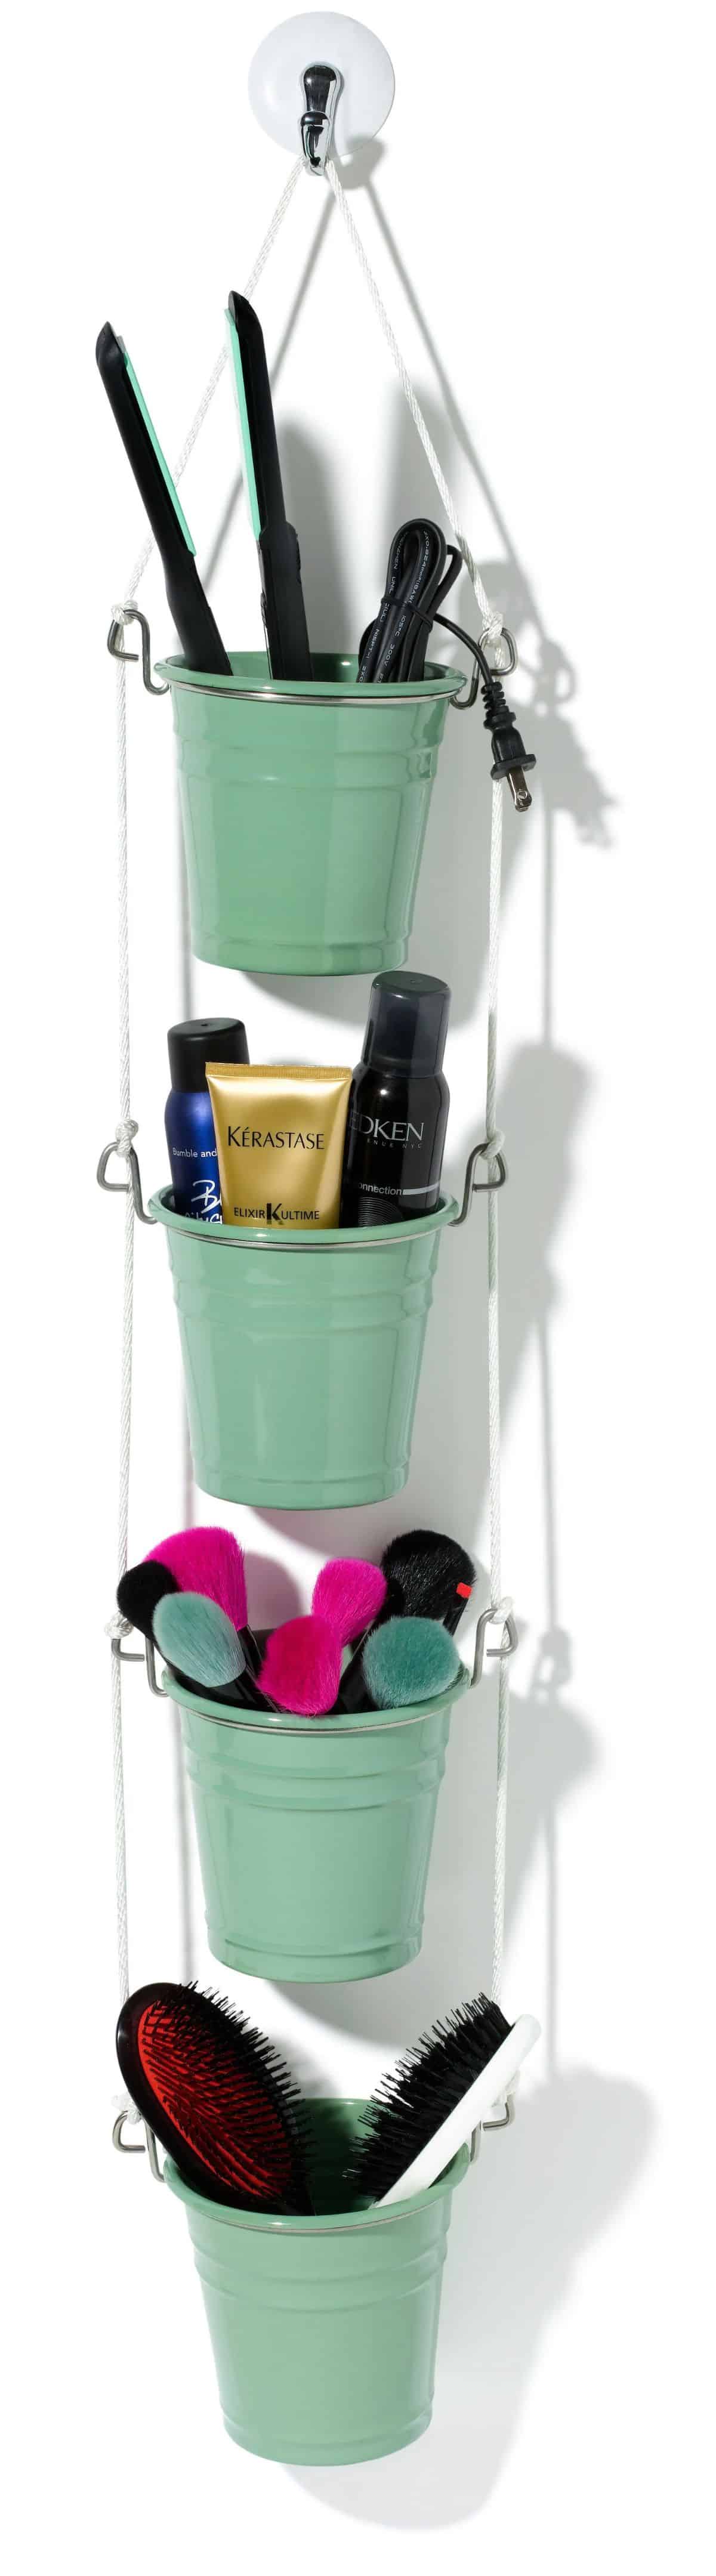 Beautiful Tiered Hanging Storage Buckets for Hair Supplies